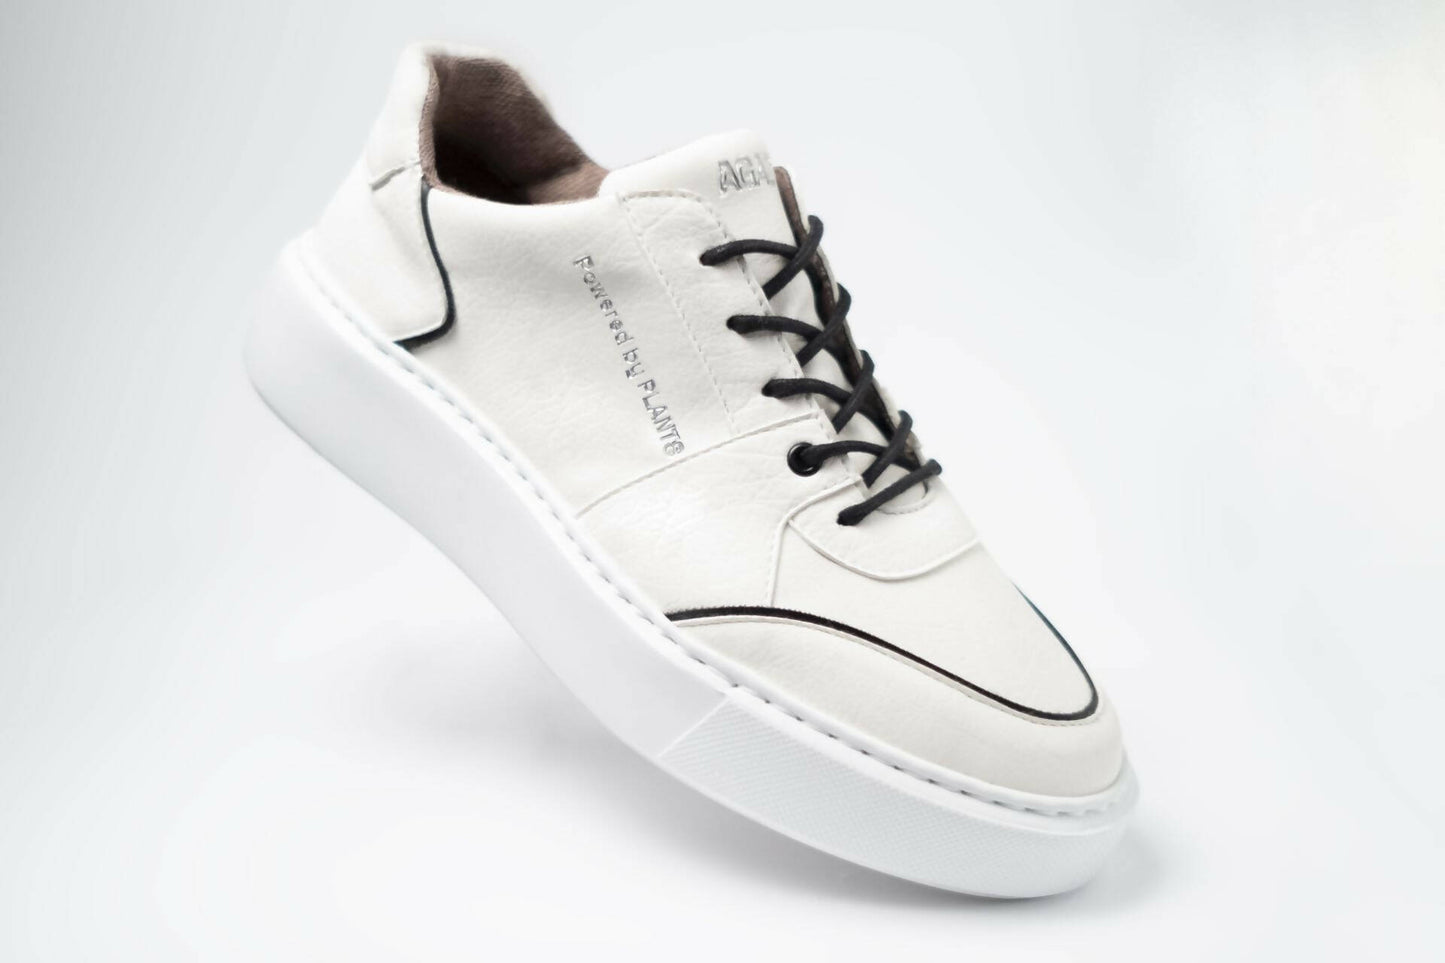 EMI low sneakers: off-white